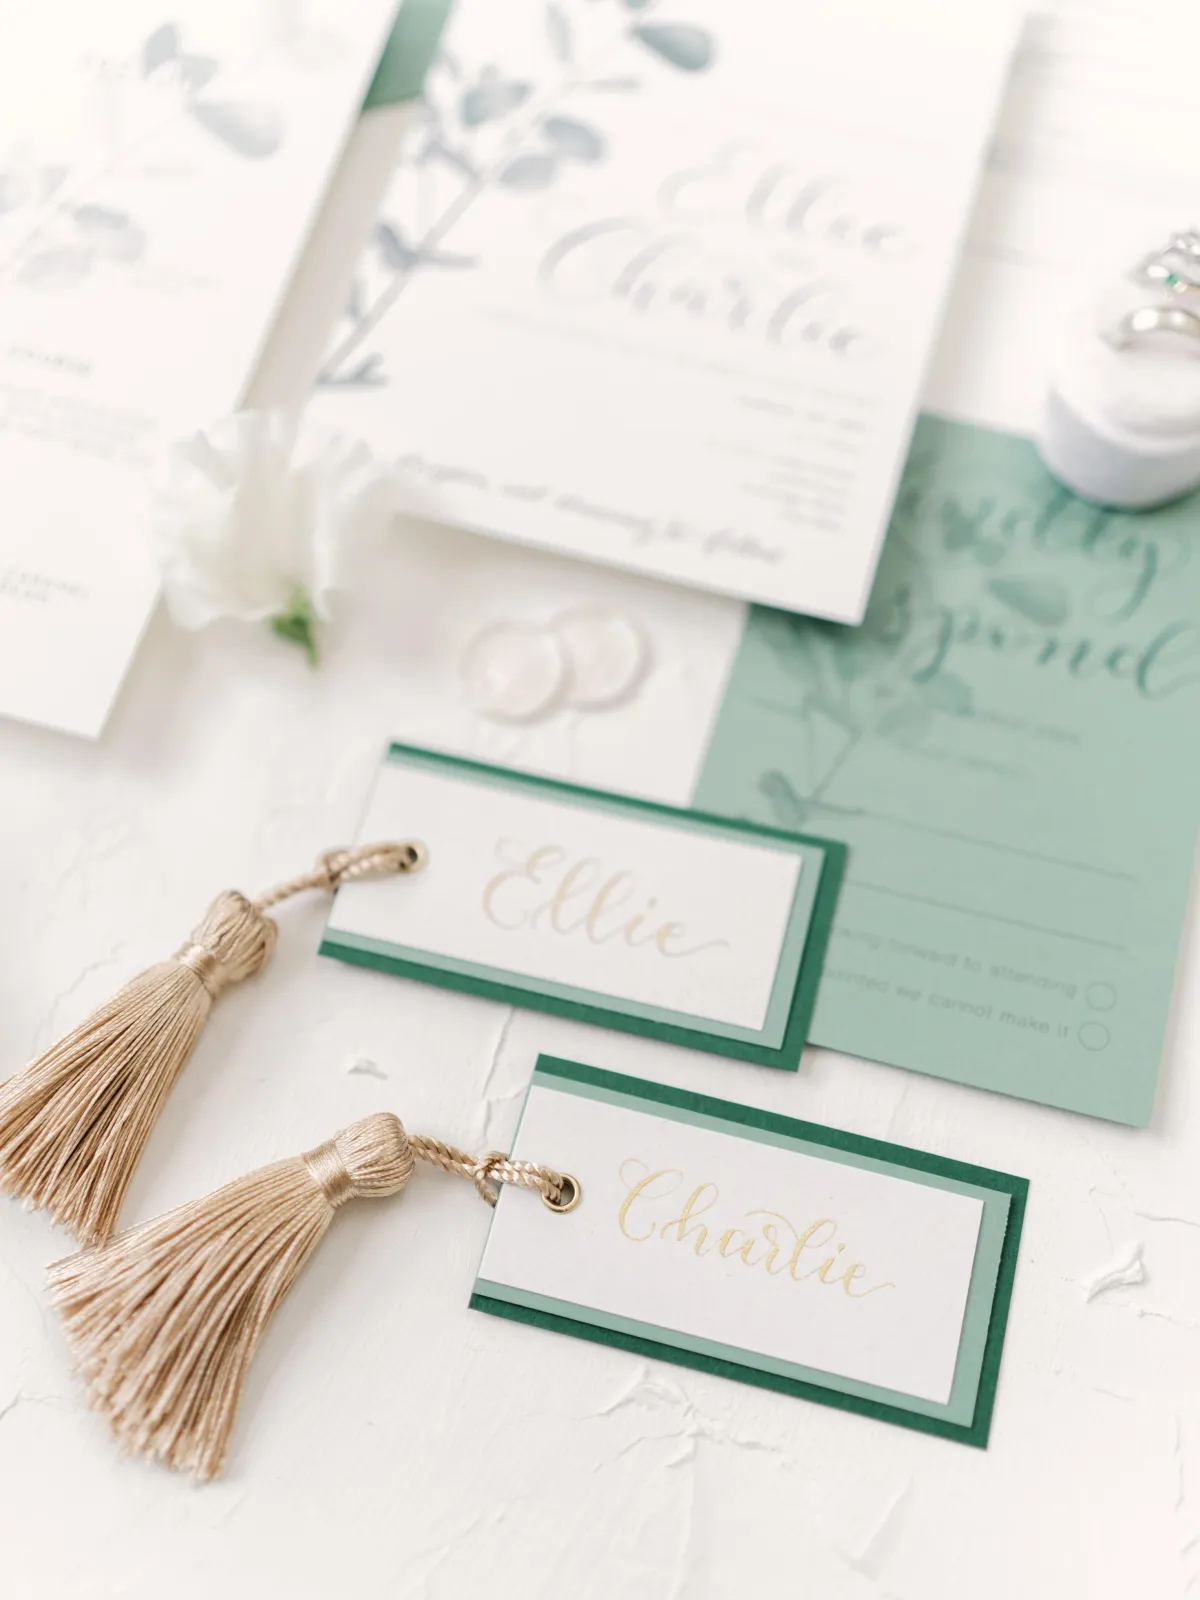 Modern Calligraphy wedding place cards with tassels